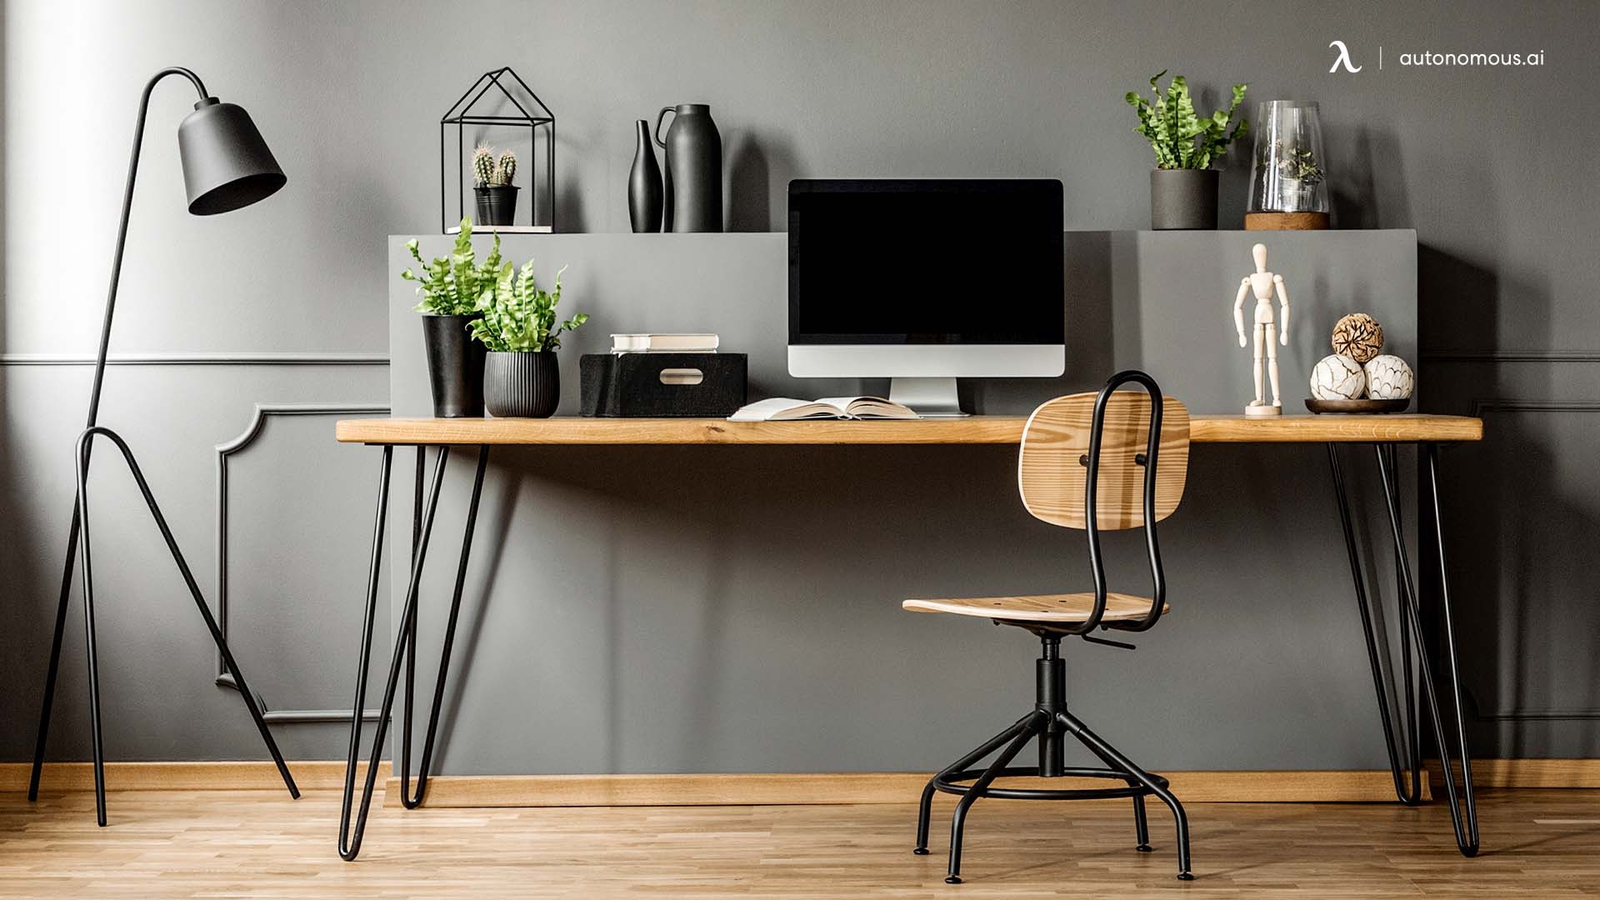 20 Black Office Design Ideas for Home Workspace